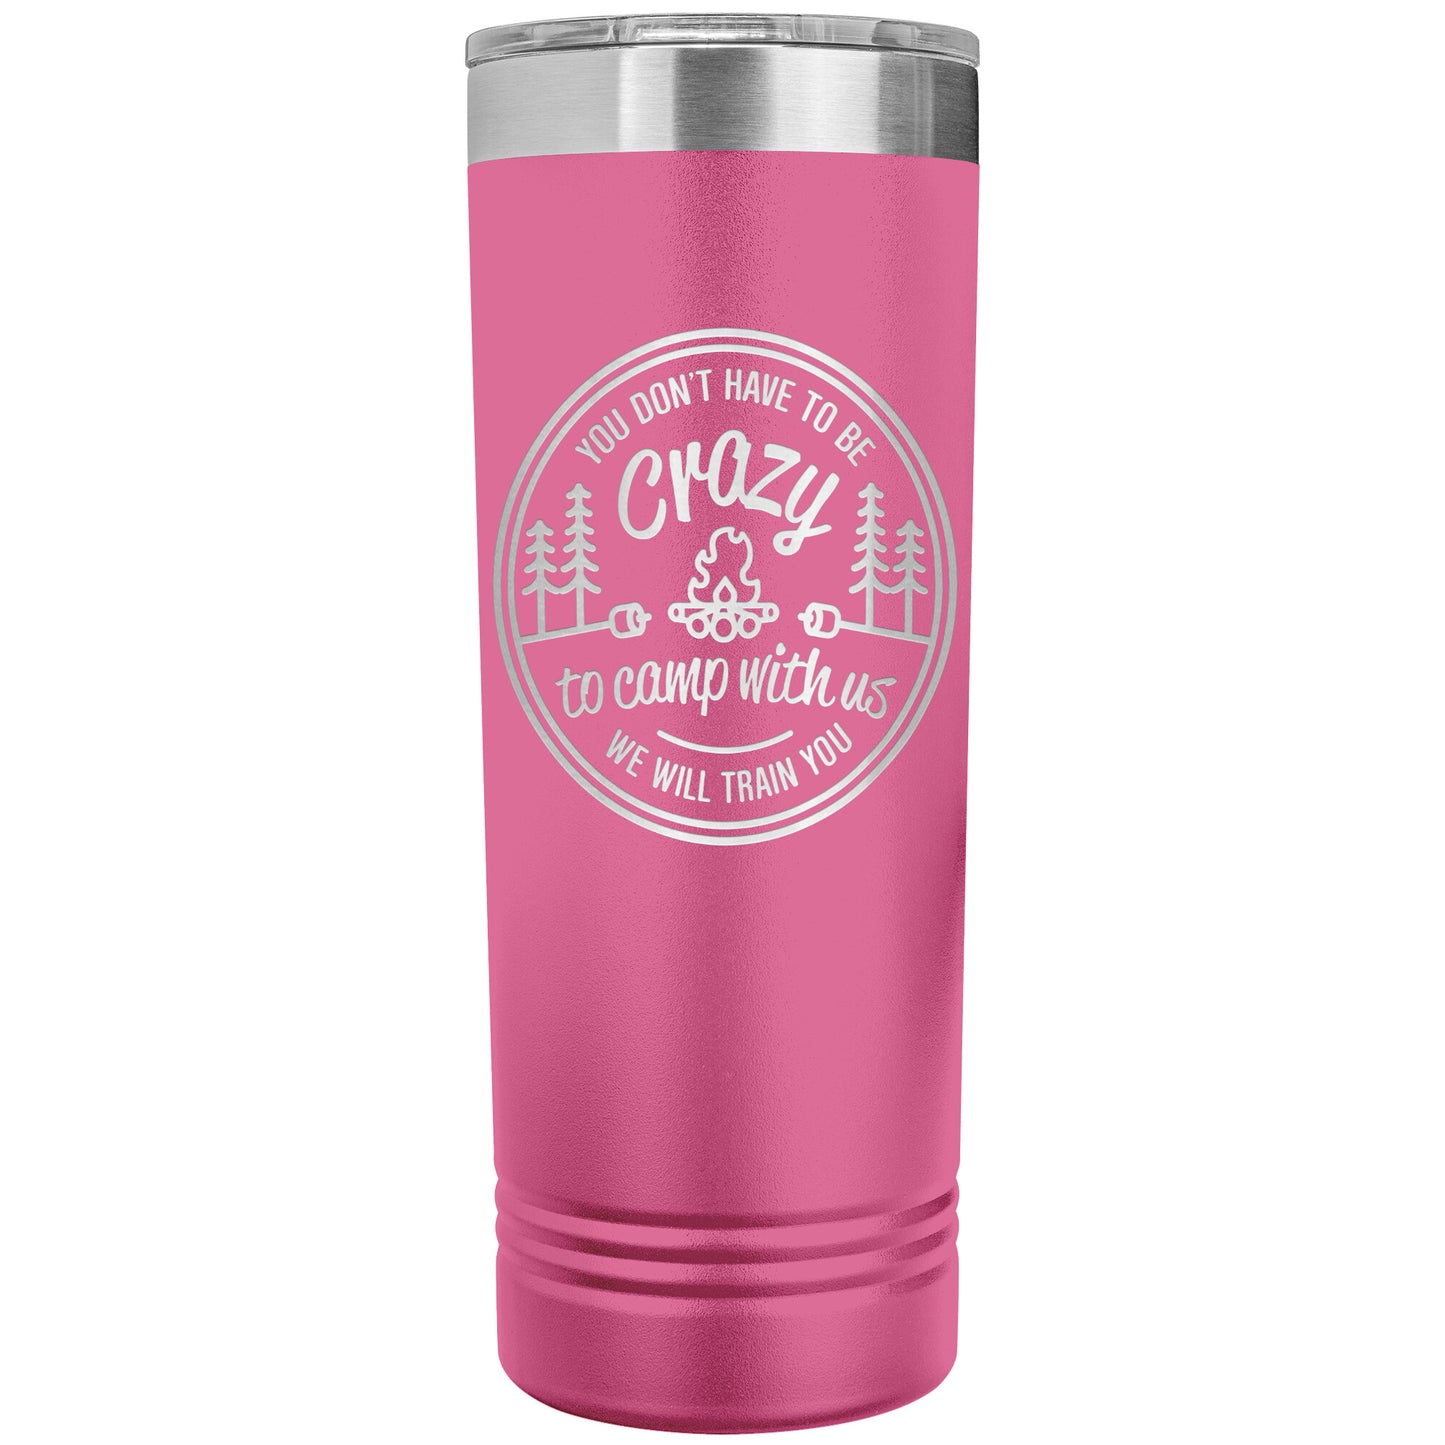 Funny Camping Tumbler Mug - You Don't Have To Be Crazy To Camp With Us